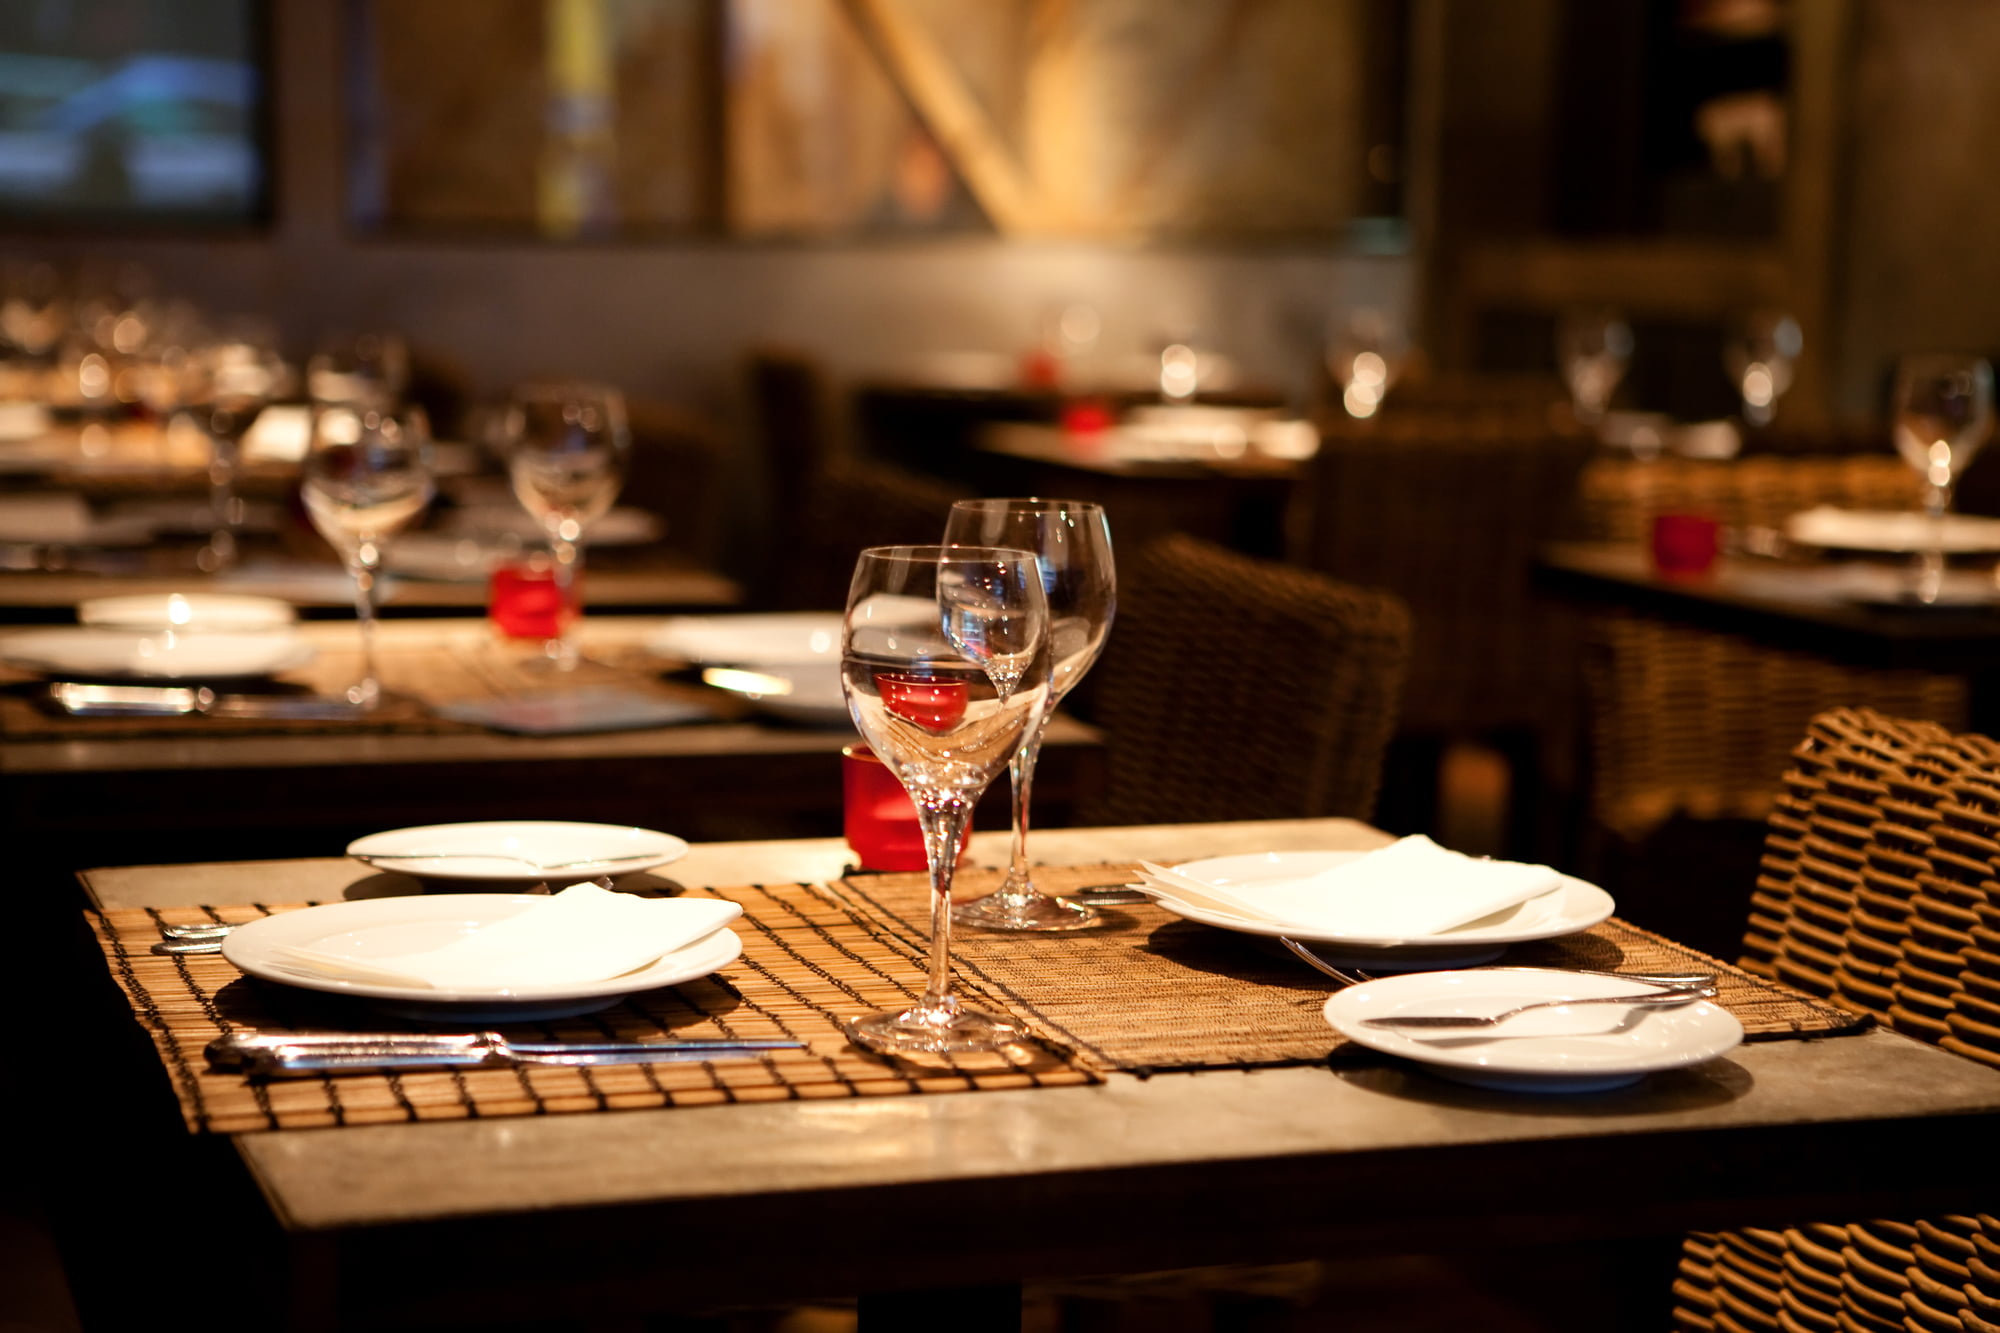 a set table at a restaurant in dim lighting